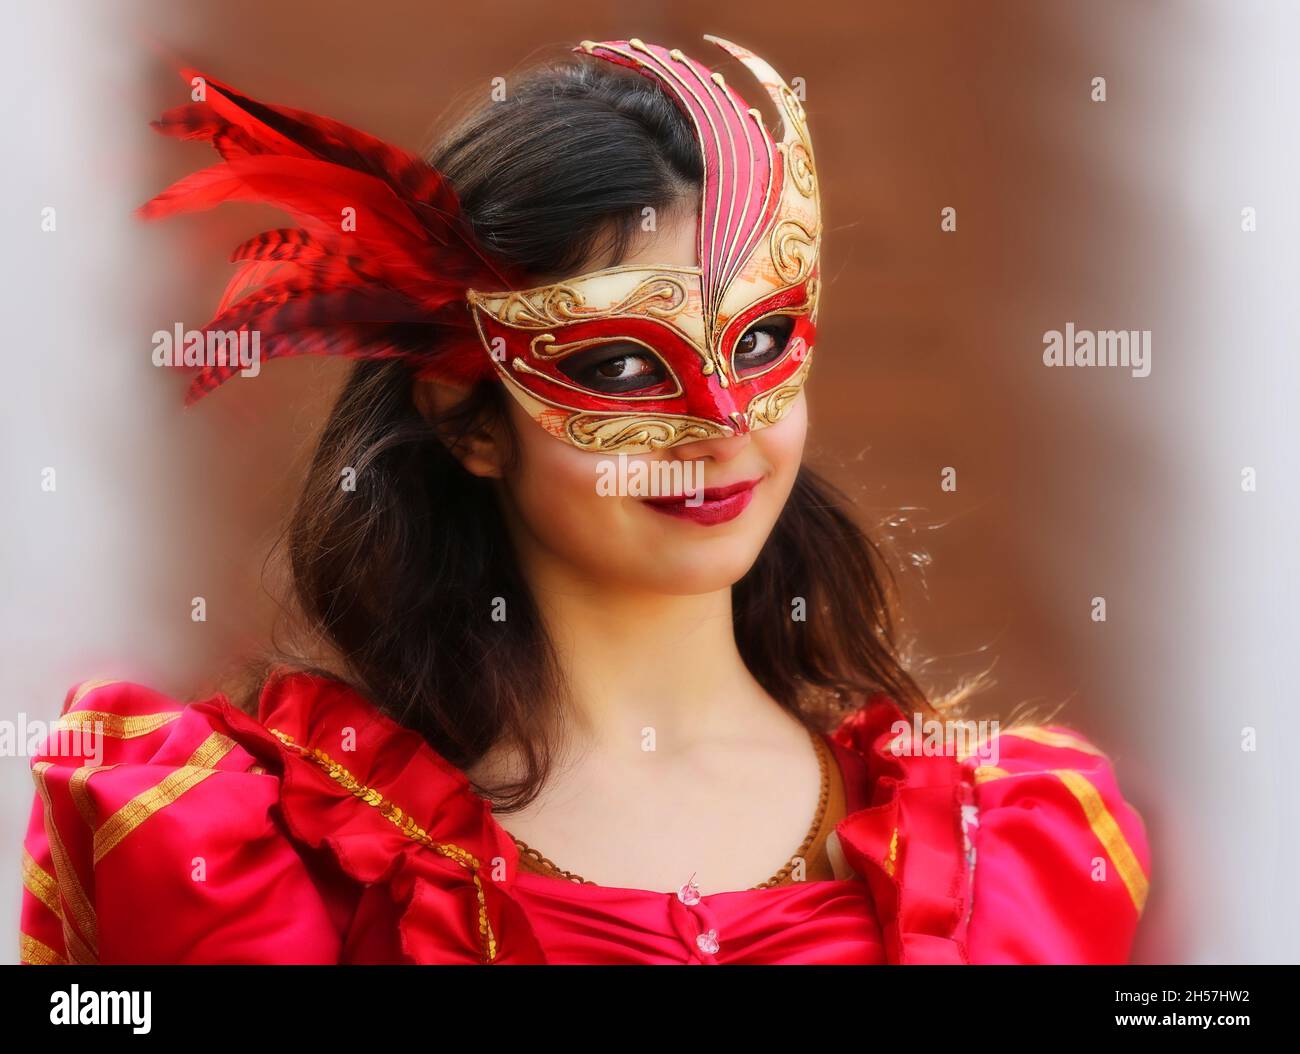 Page 5 - Maskenball High Resolution Stock Photography and Images - Alamy